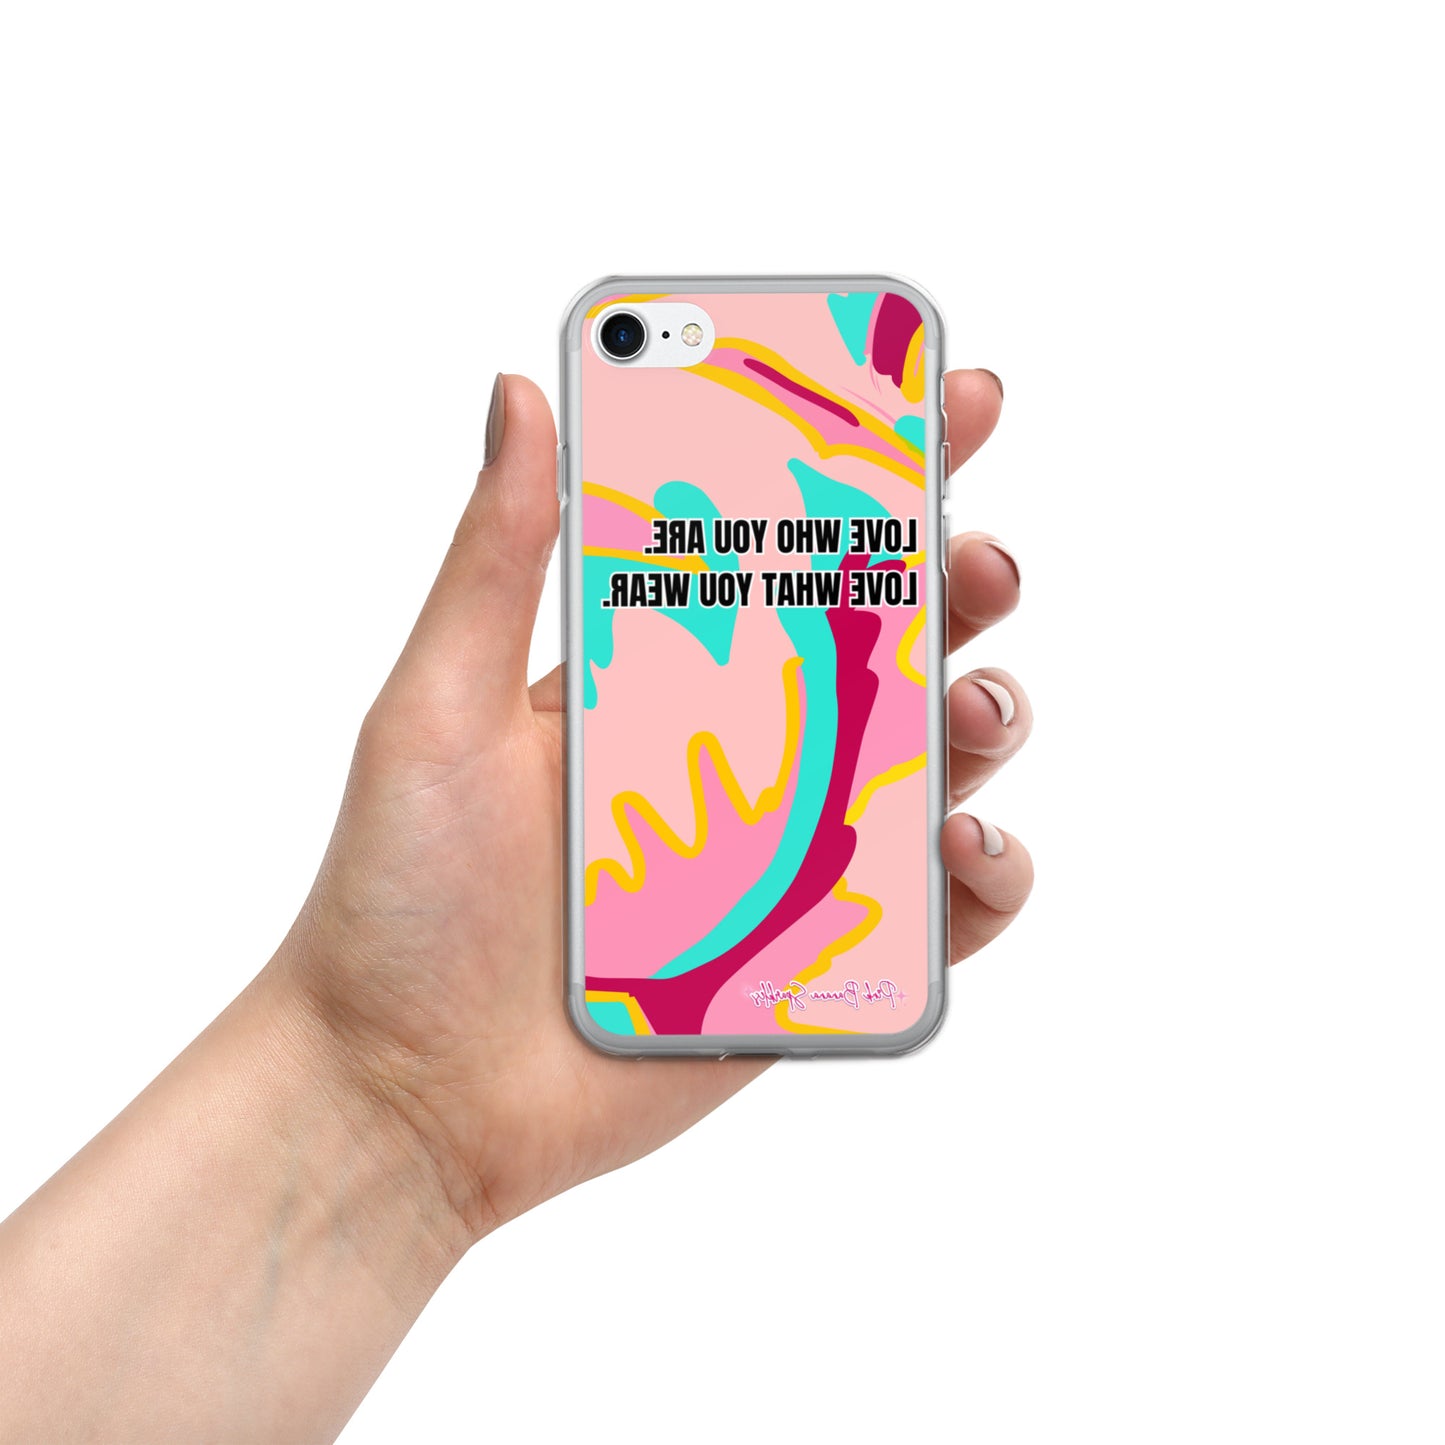 Body Love- "Love Who You Are" Case for iPhone® (Mirror Image for Selfies)